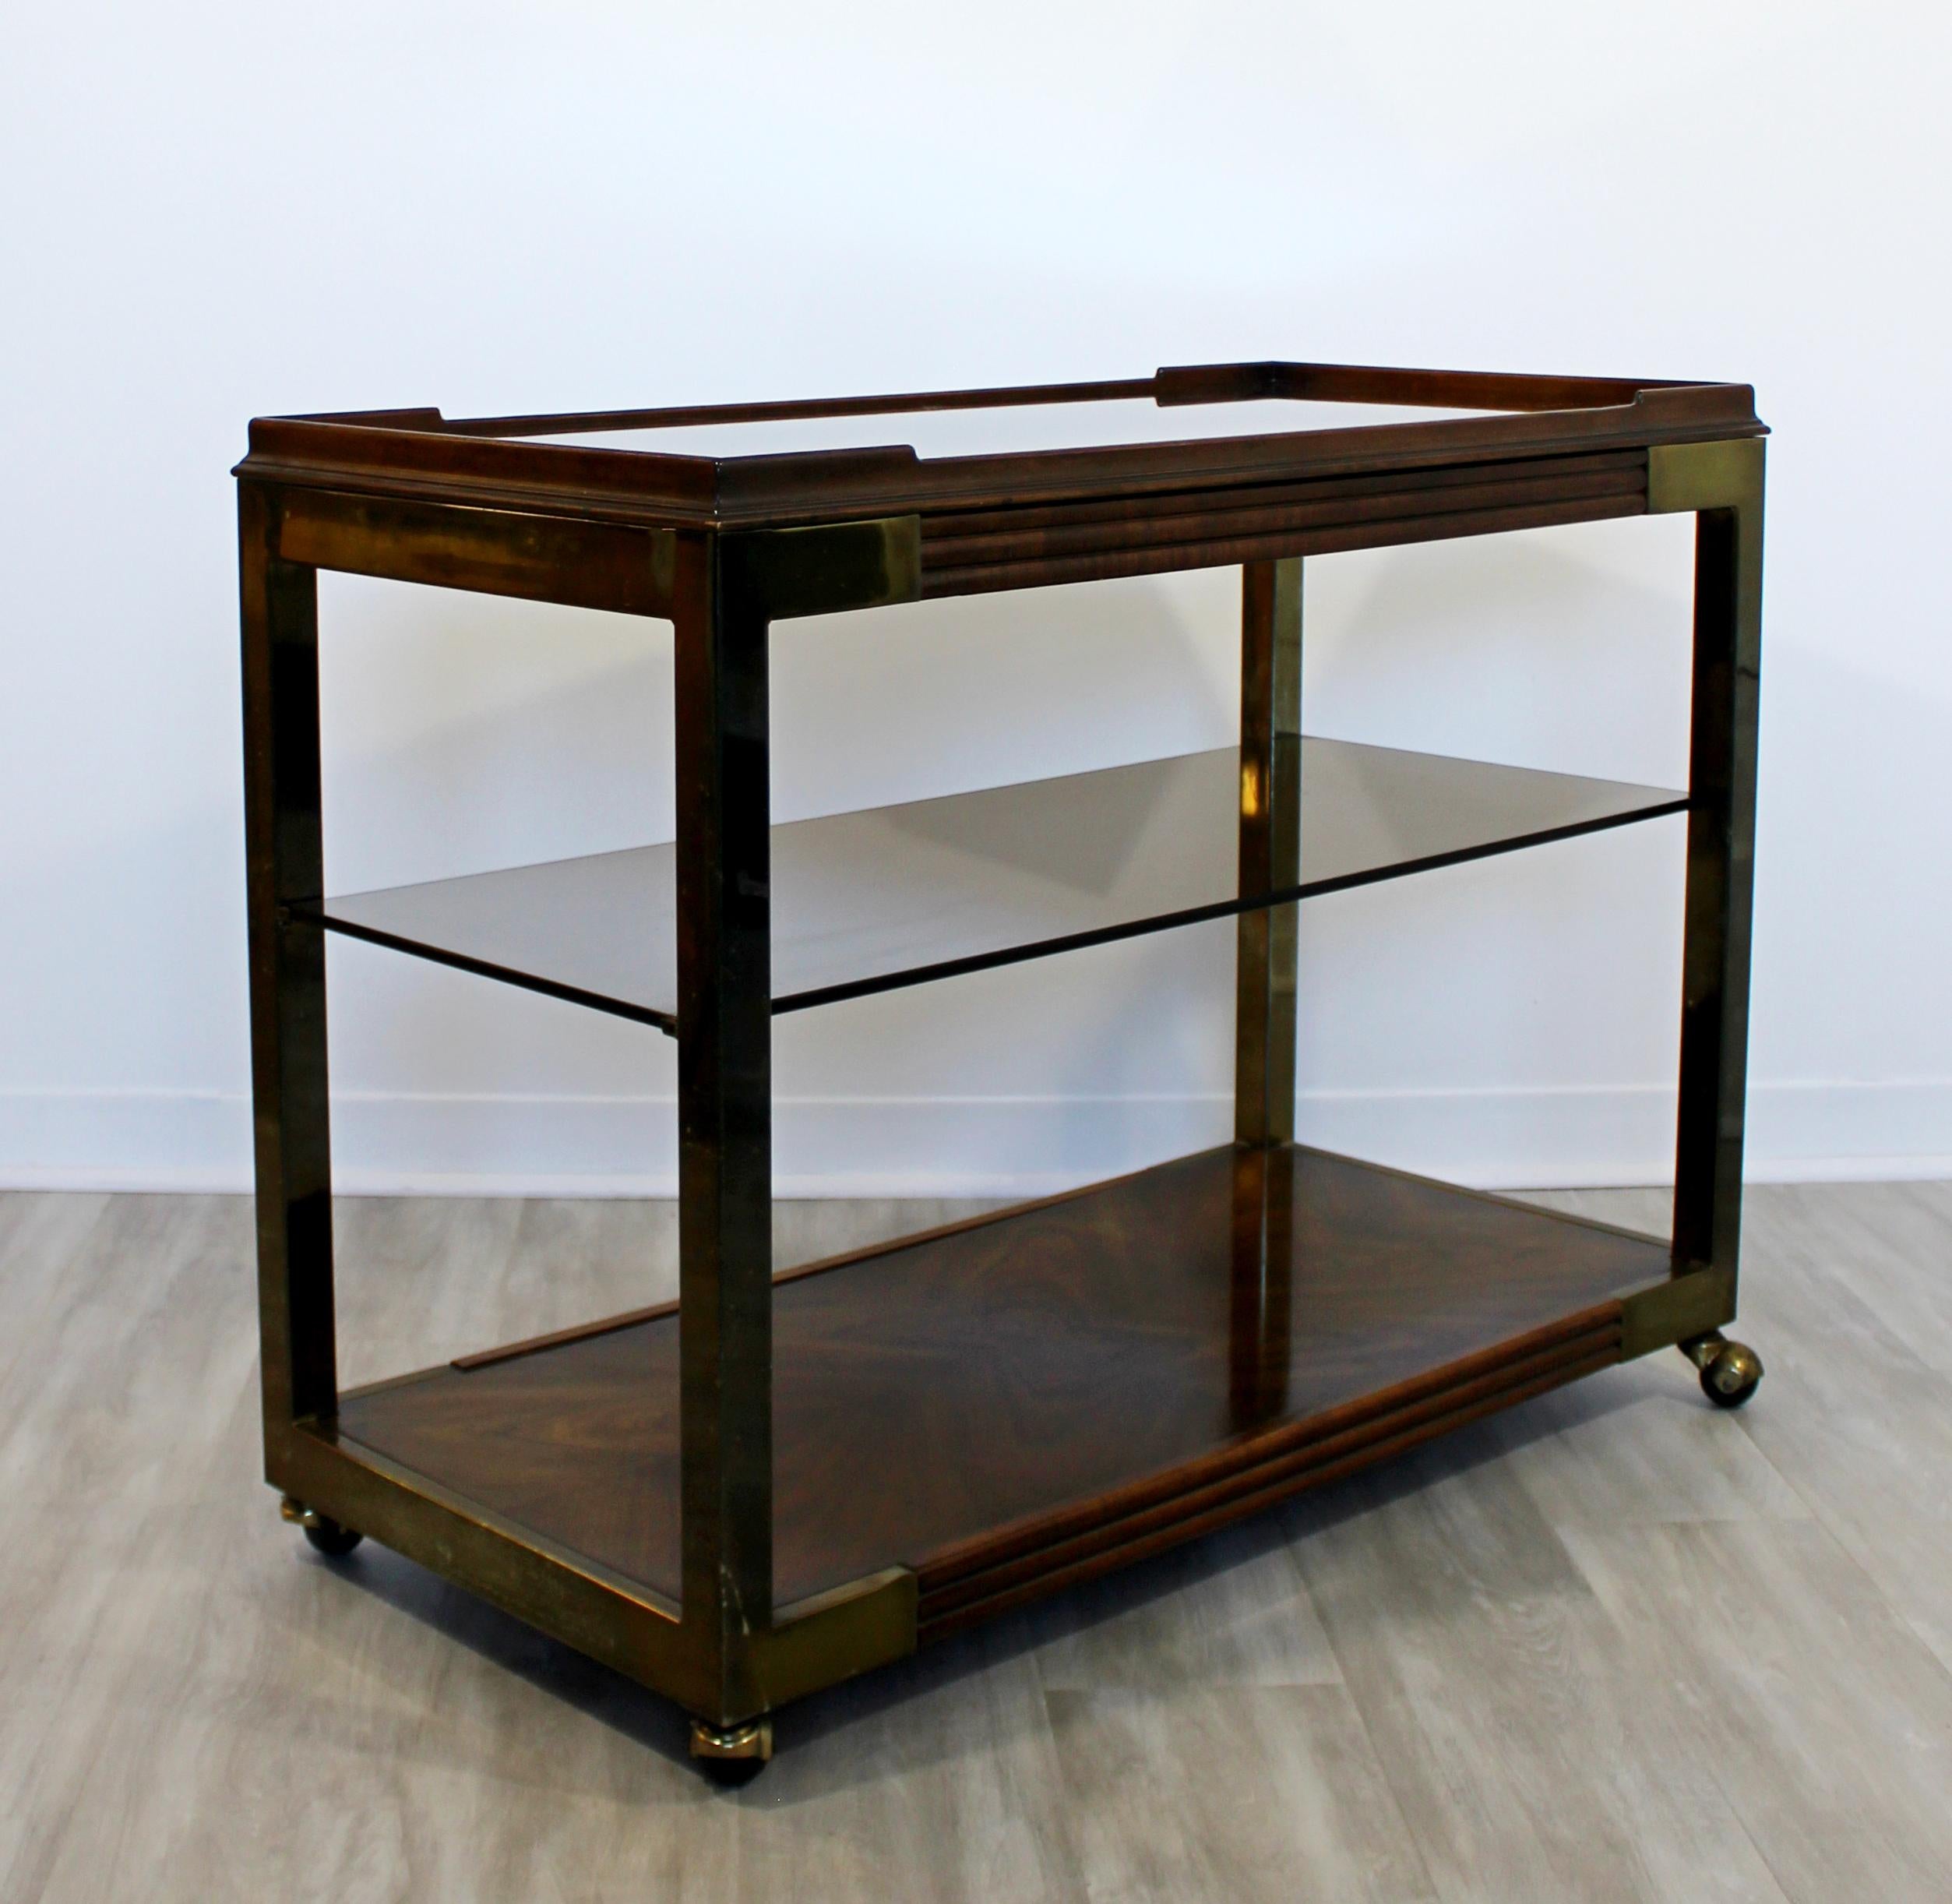 For your consideration is a fantastic, rolling bar or service cart, with three tiers; one wood, one glass and one mirrored, on a wood base, circa 1950s. In excellent vintage condition. The dimensions are 39.5